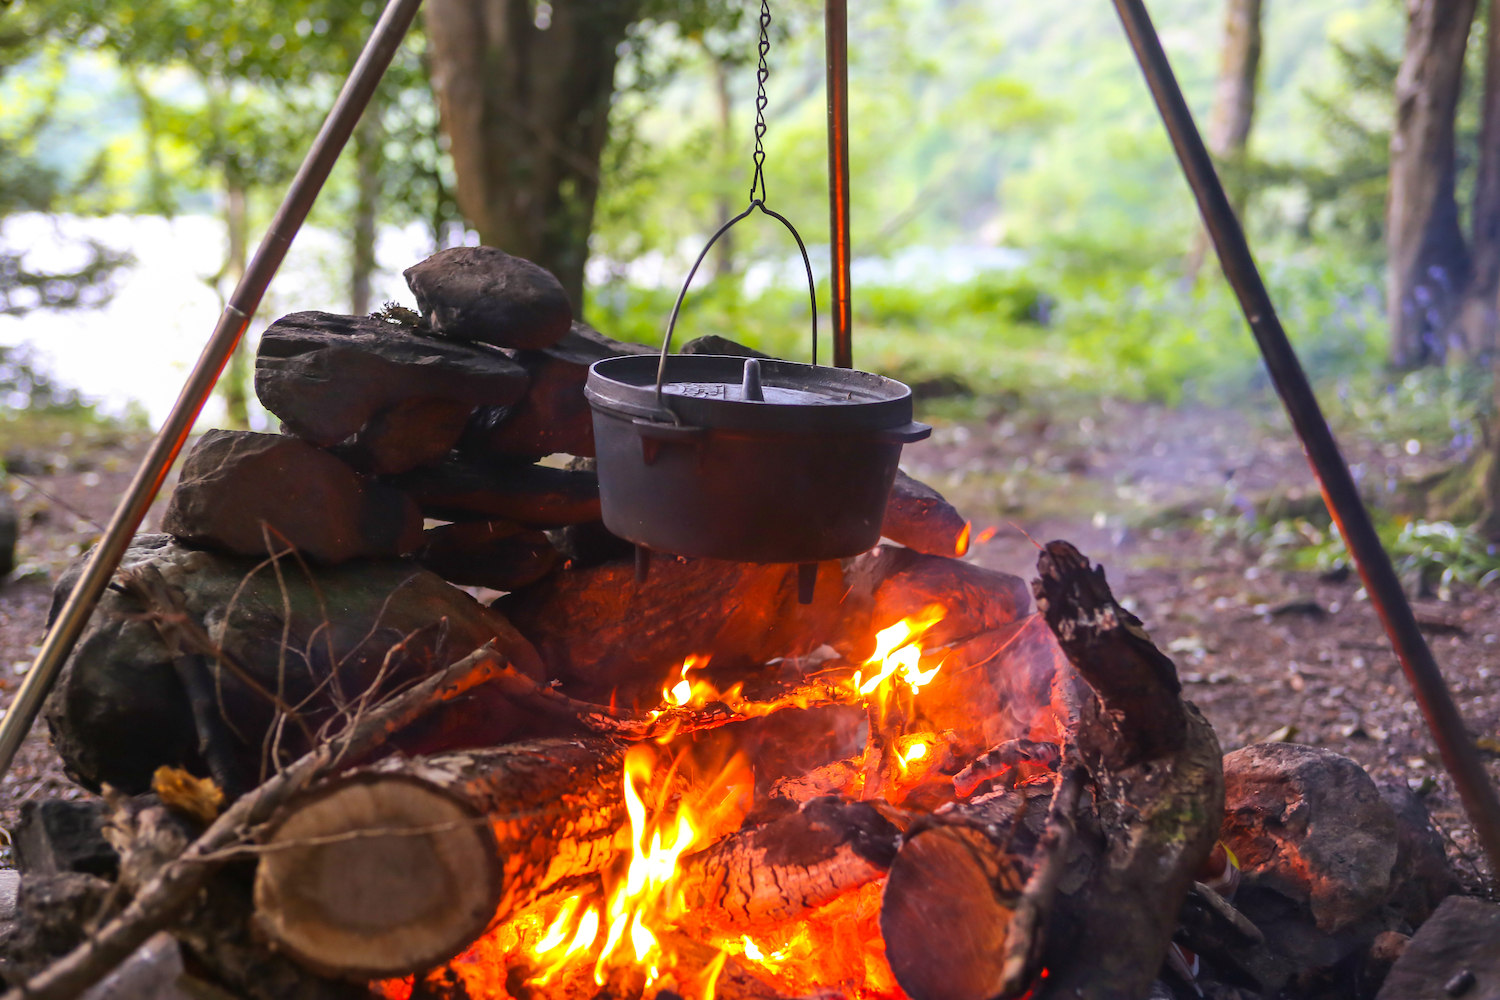 Cast iron pot cooks over open fire in a campsite